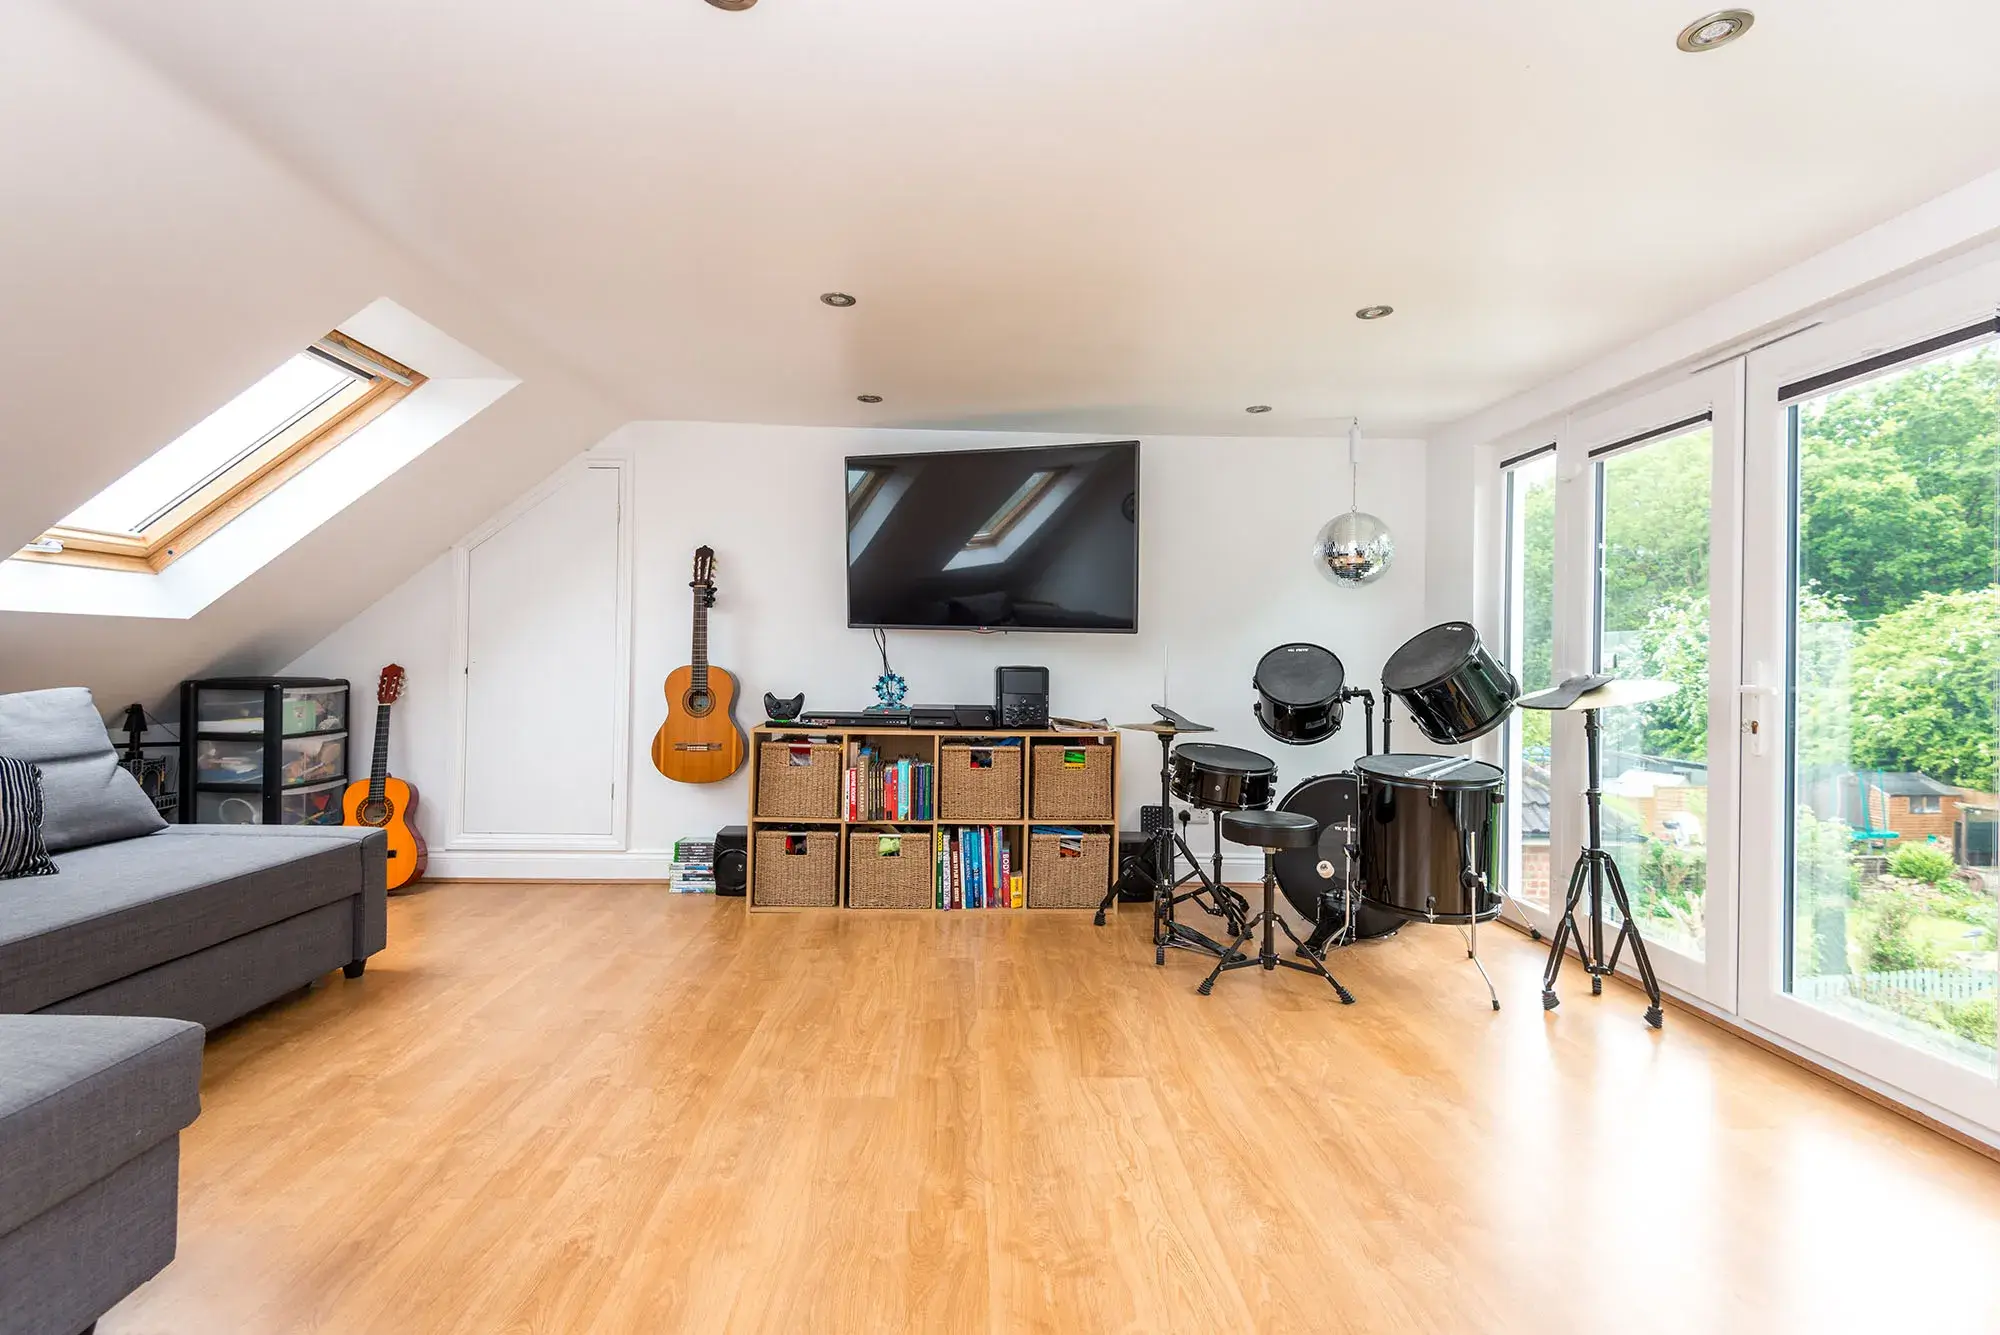 A loft converted into a music room, with drums and guitars